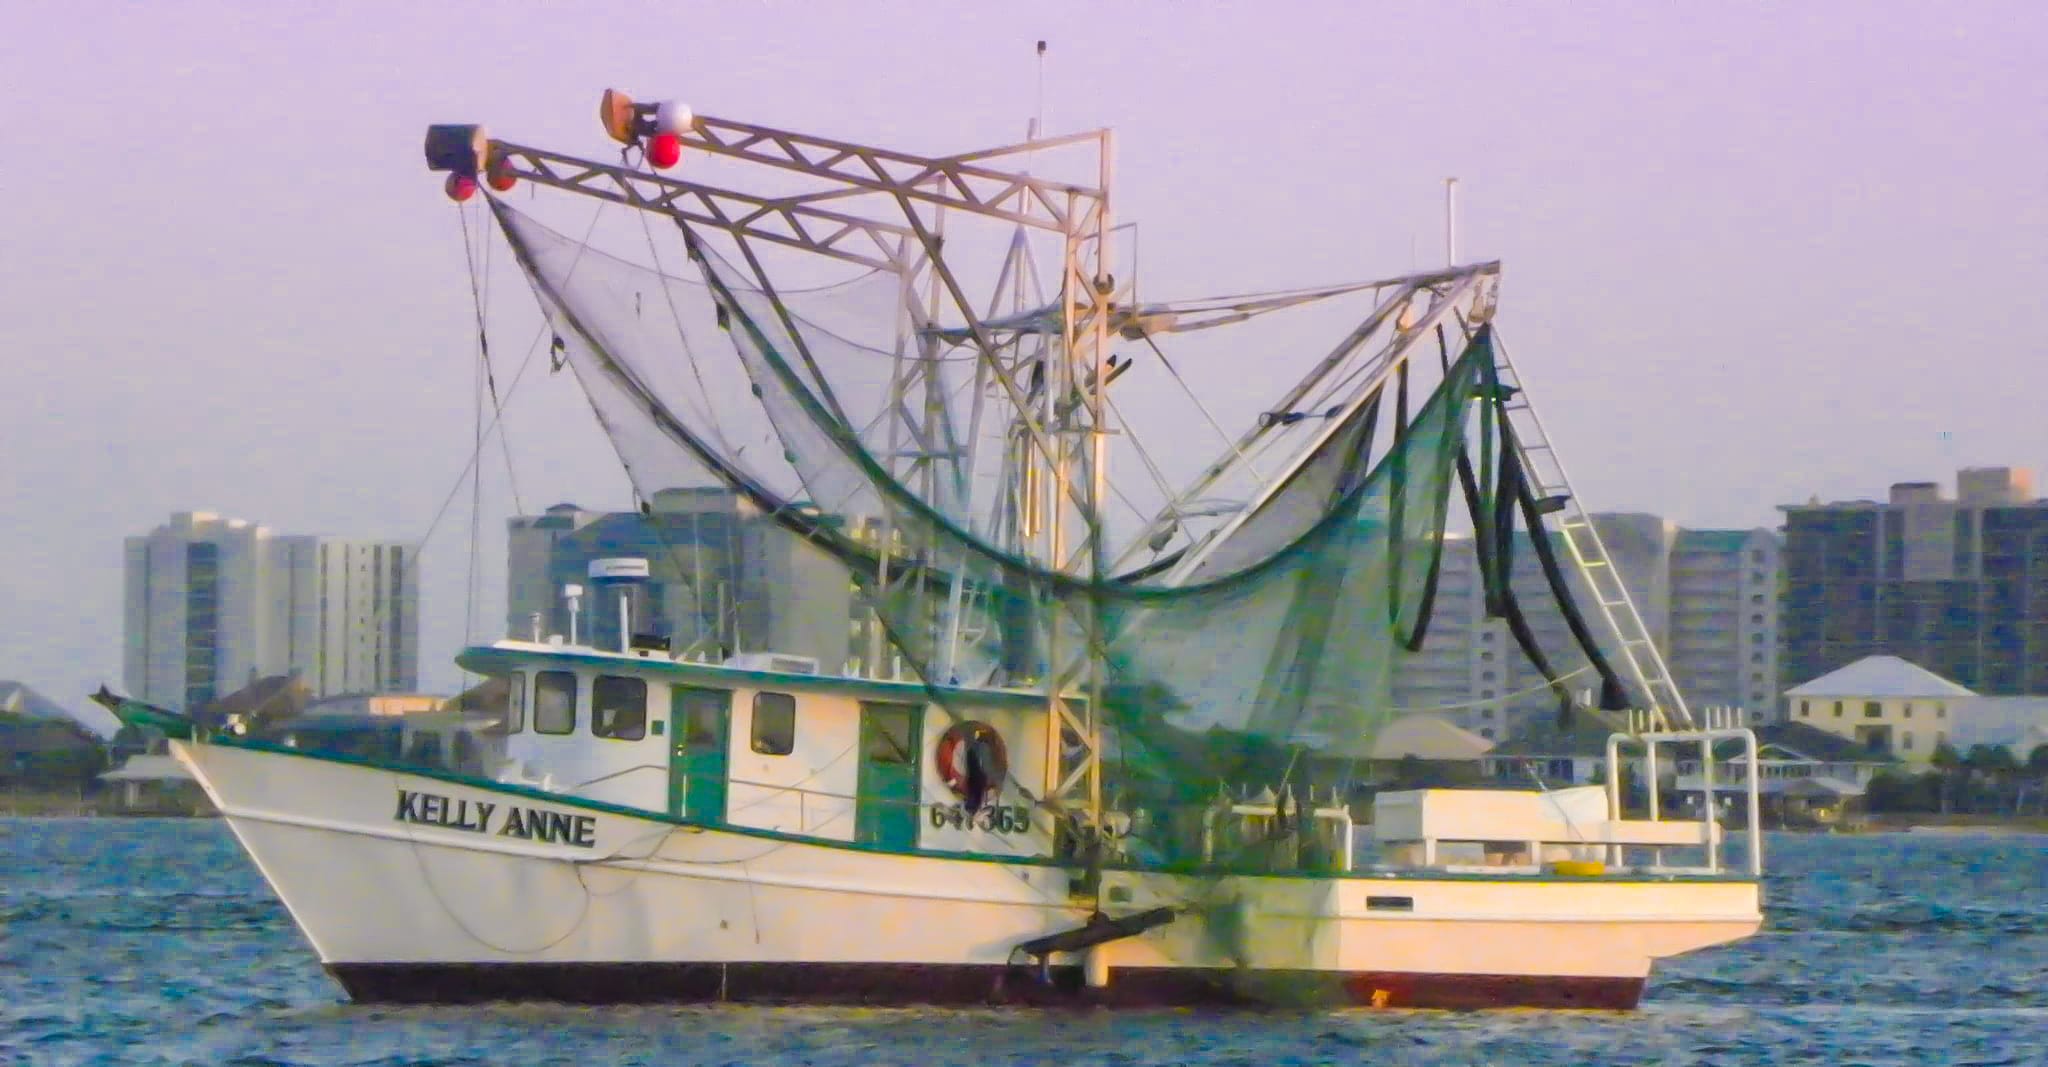 Our 55' Shrimp Boat the Kelly Anne. We have been providing fresh off the boat shrimp on the Gulf Coast for over 30 years!